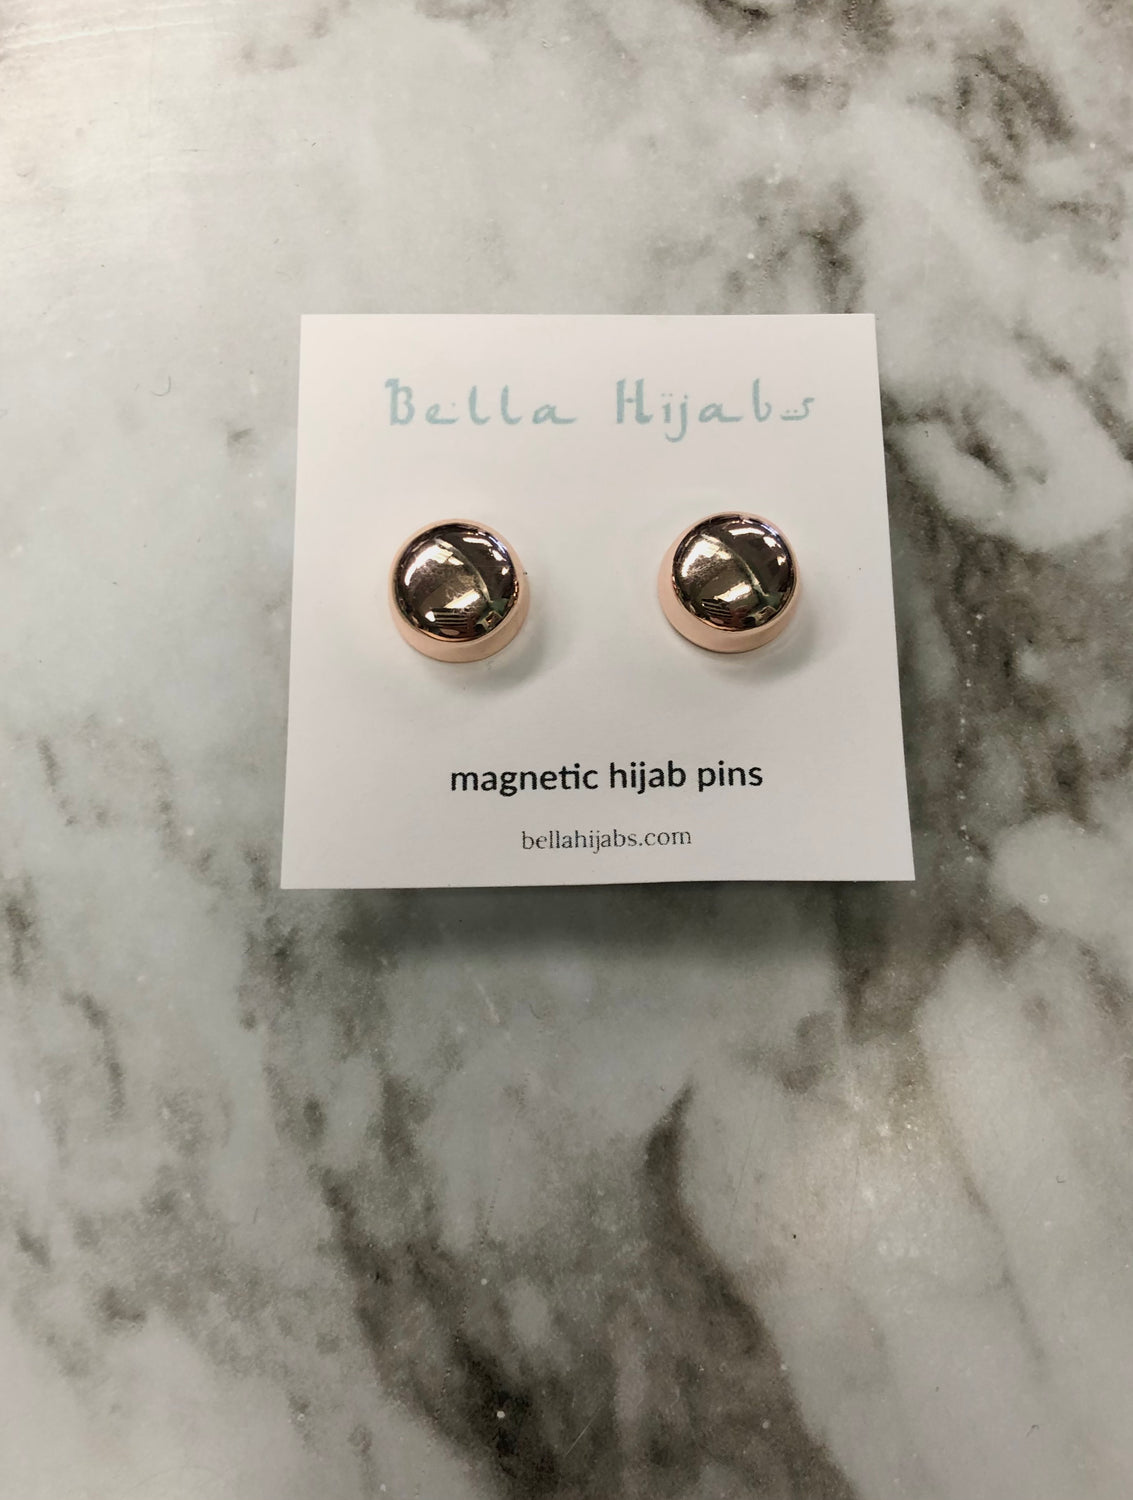 rose gold set of two clasp magnet snag free hijab pins